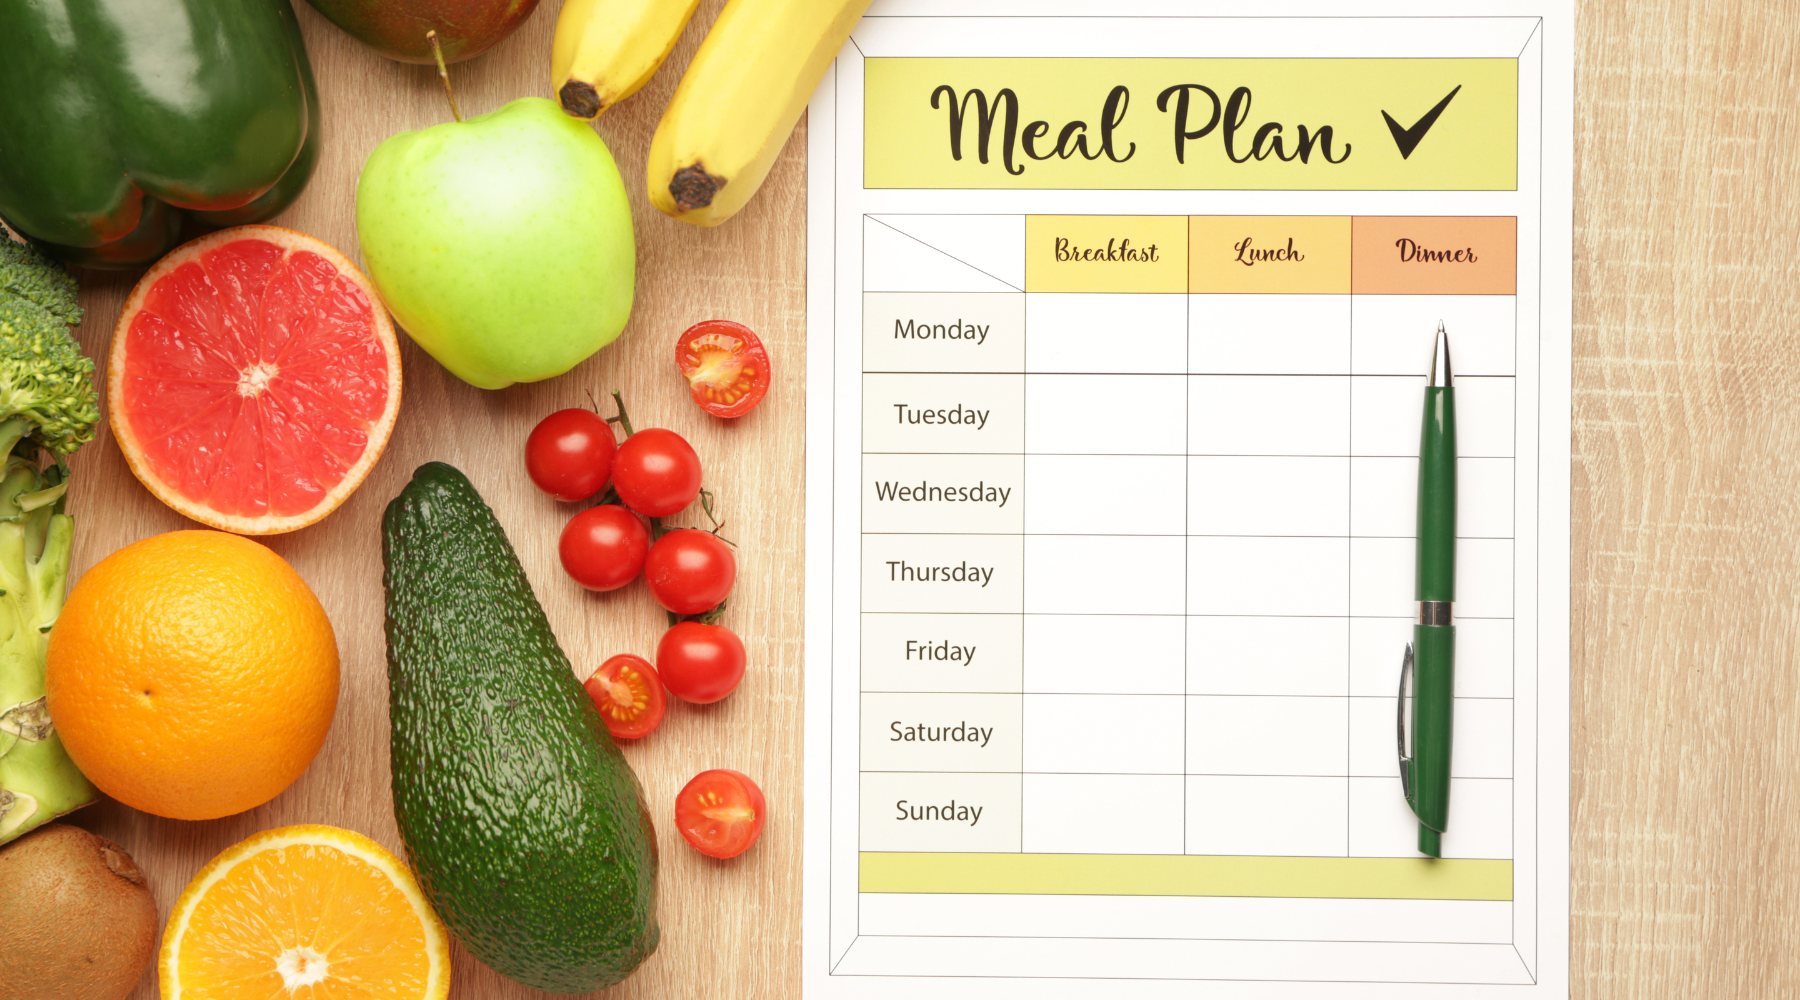 THE BENEFITS OF MEAL PLANNING AND HOW TO GET STARTED